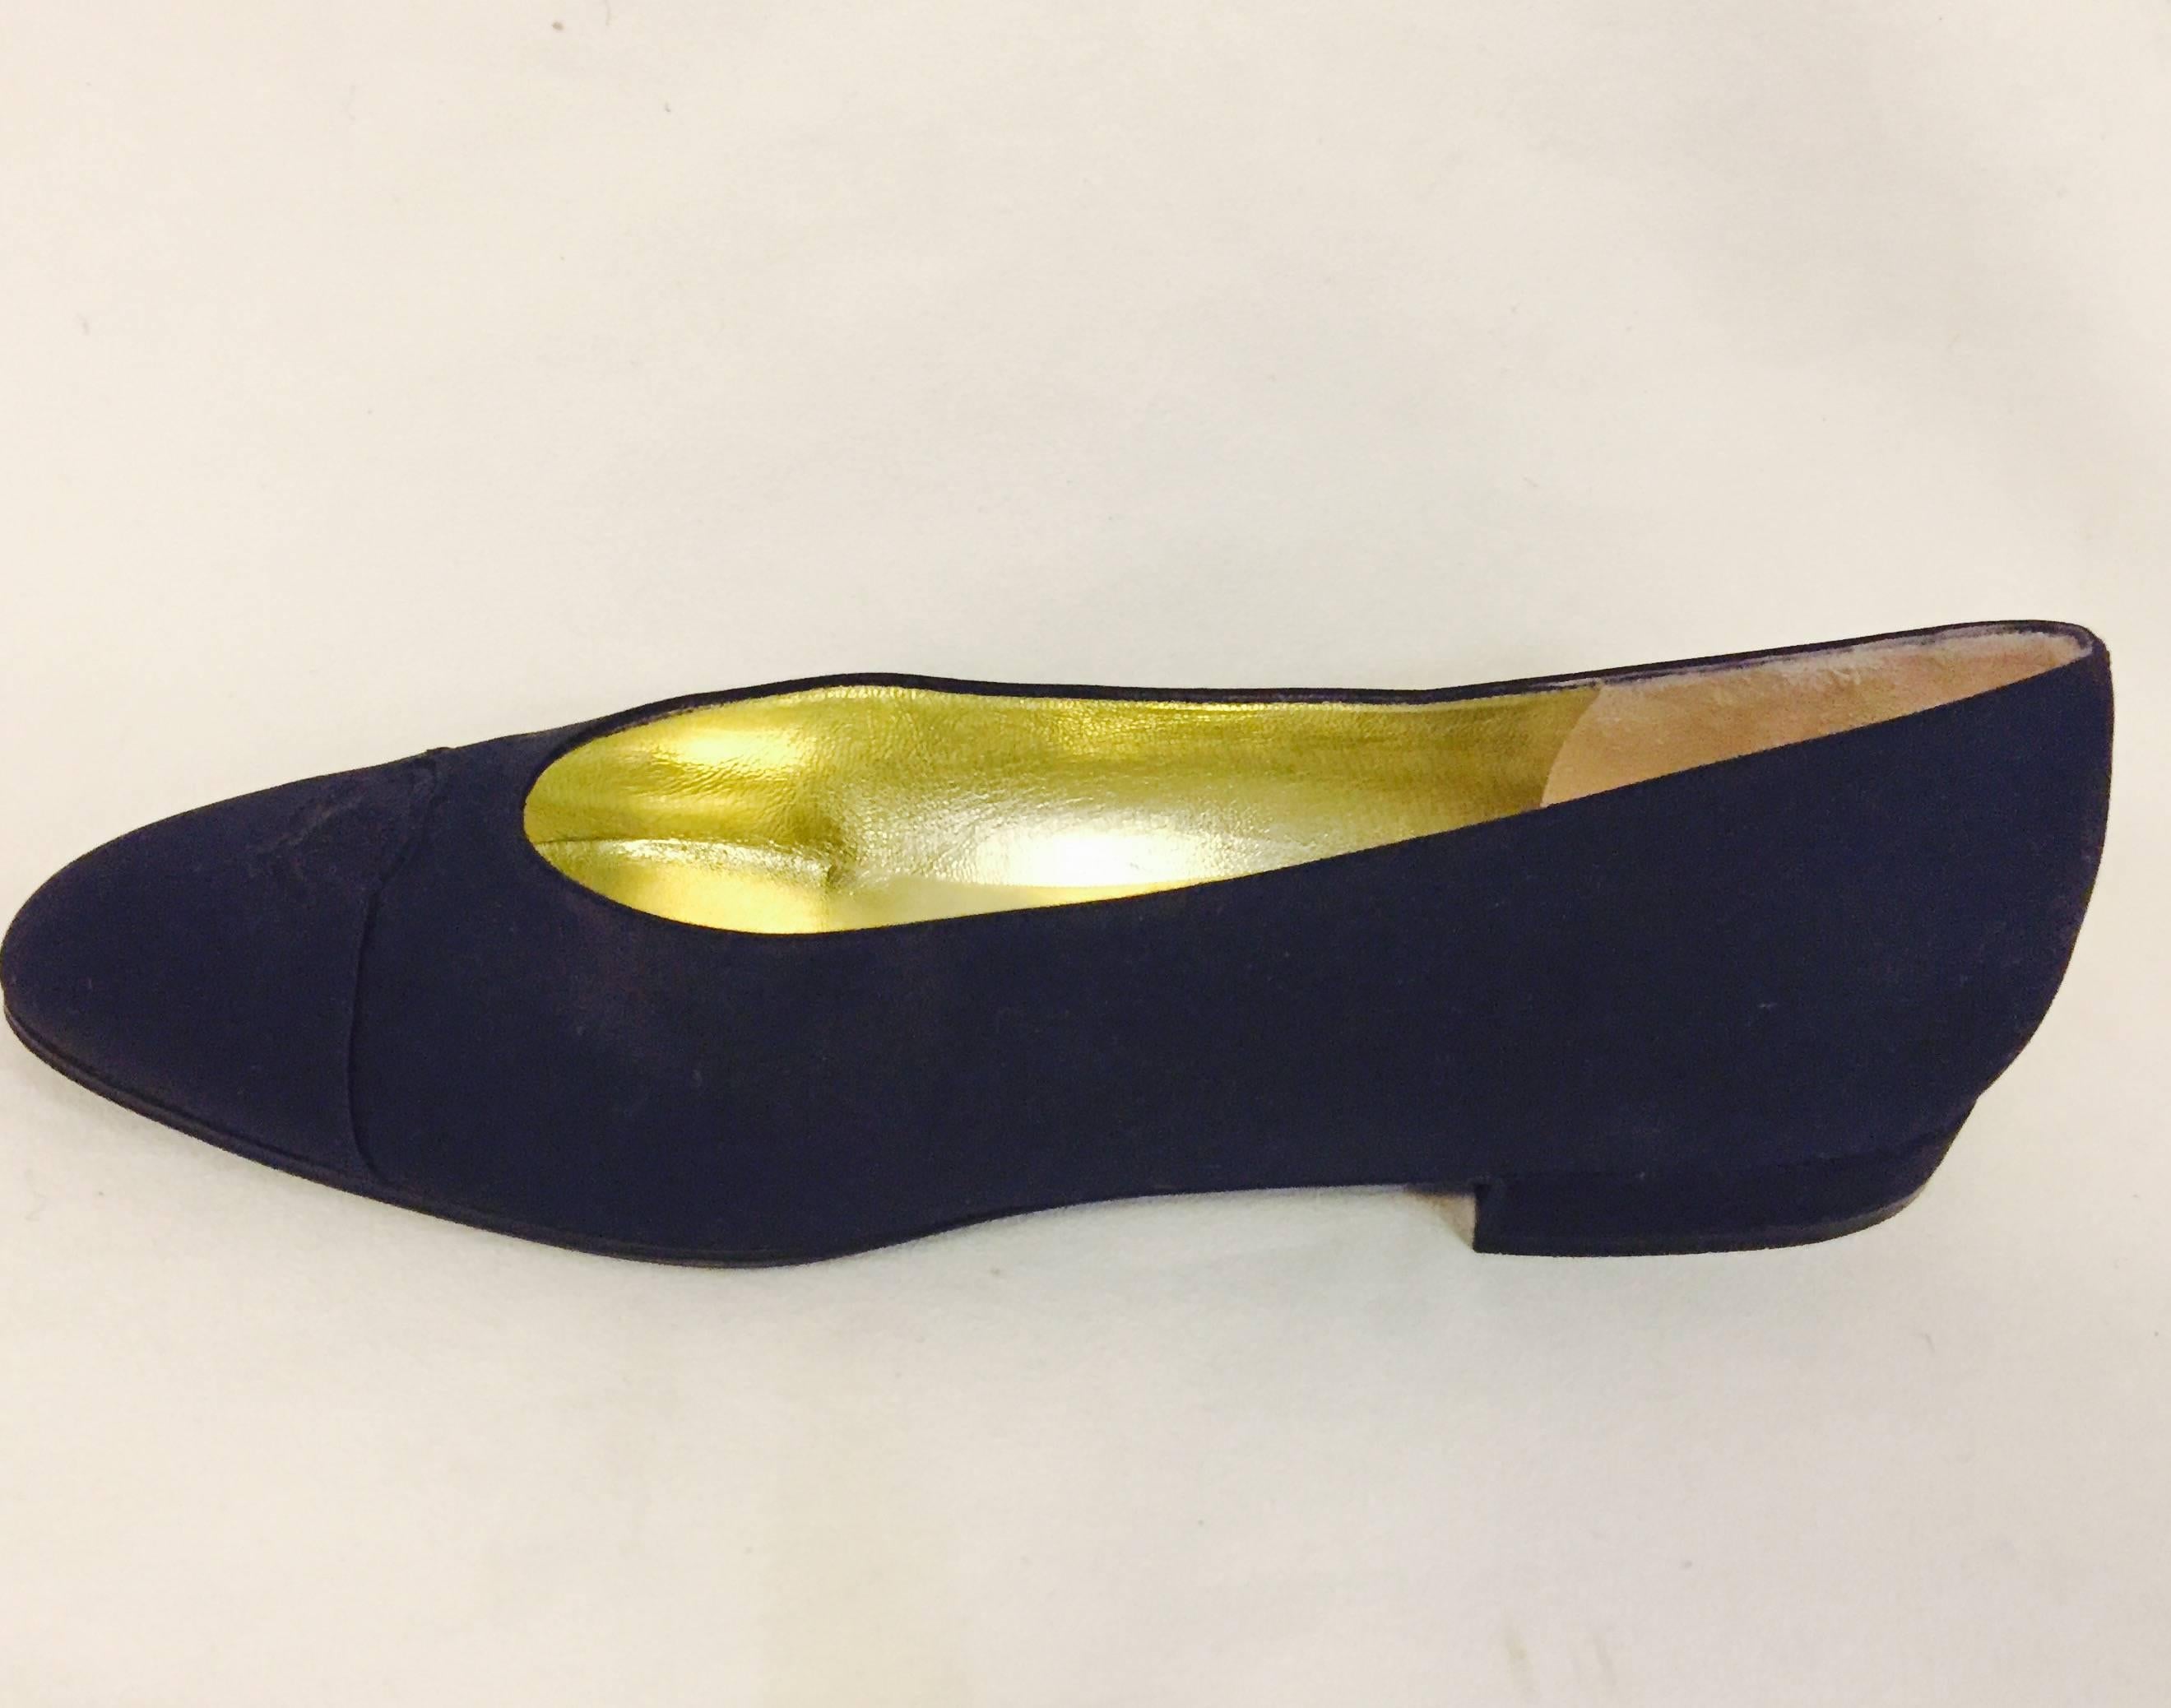 These classic Chanel black satin cap toe flats fully lined in gold tone leather are spectacular.  The CC logo stitched in same satin material at top of shoe a must for dressing up a work ensemble.  In excellent condition!!  Made in Italy